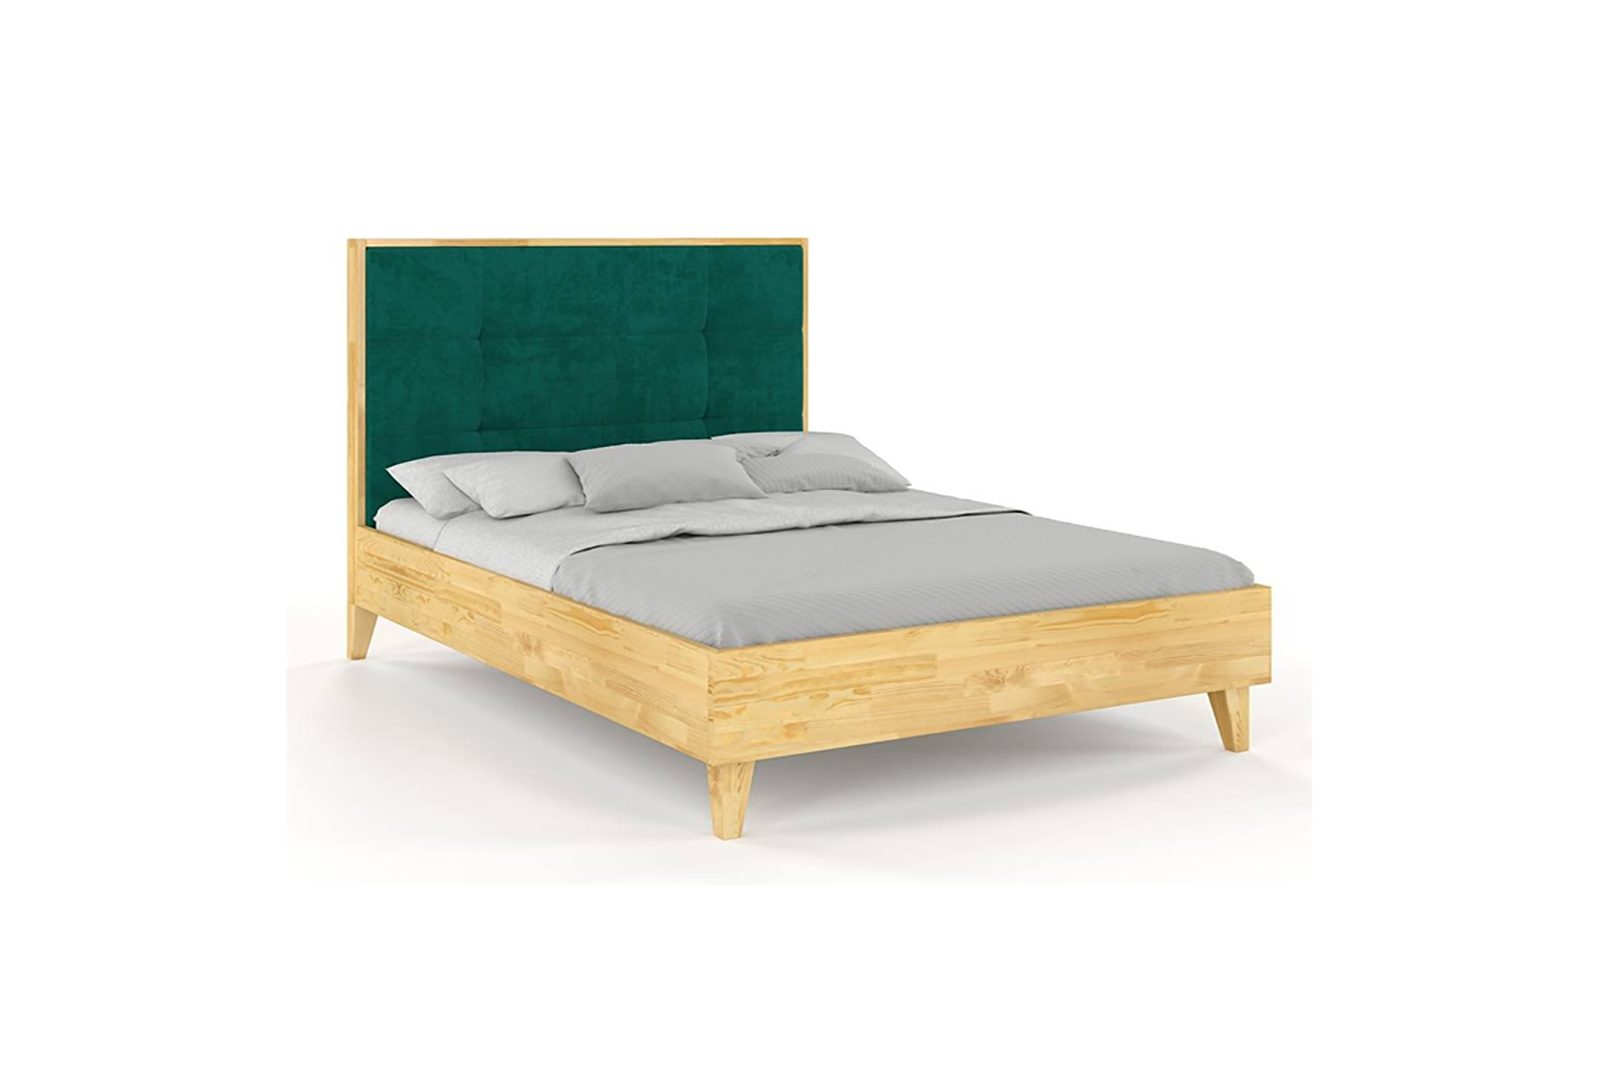 VISBY FRIDA WOODEN PINE BED WITH A HIGH HEADBOARD 2